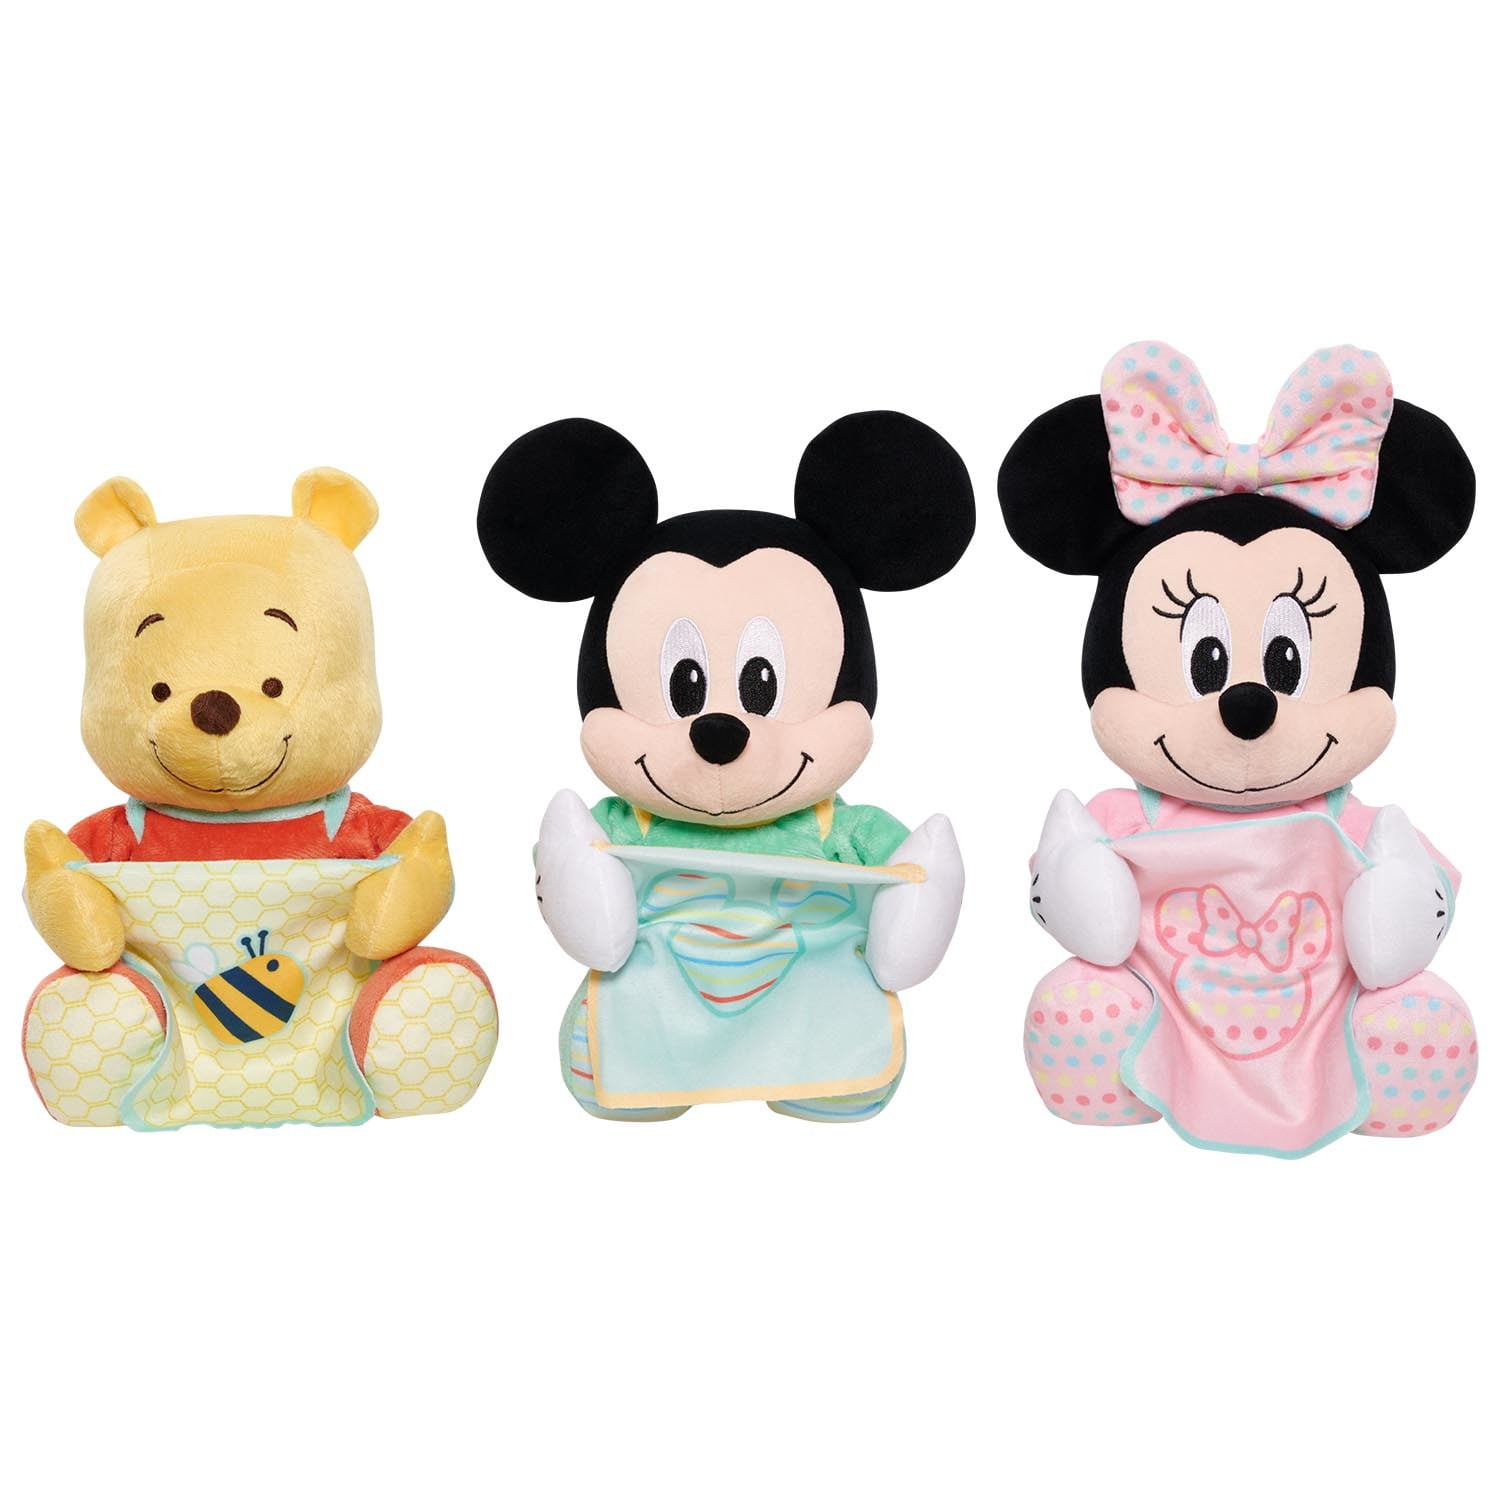 Disney Baby 11-inch Hide-and-Seek Mickey Mouse Interactive Plush, Kids Toys  for Ages 09 Month by Just Play